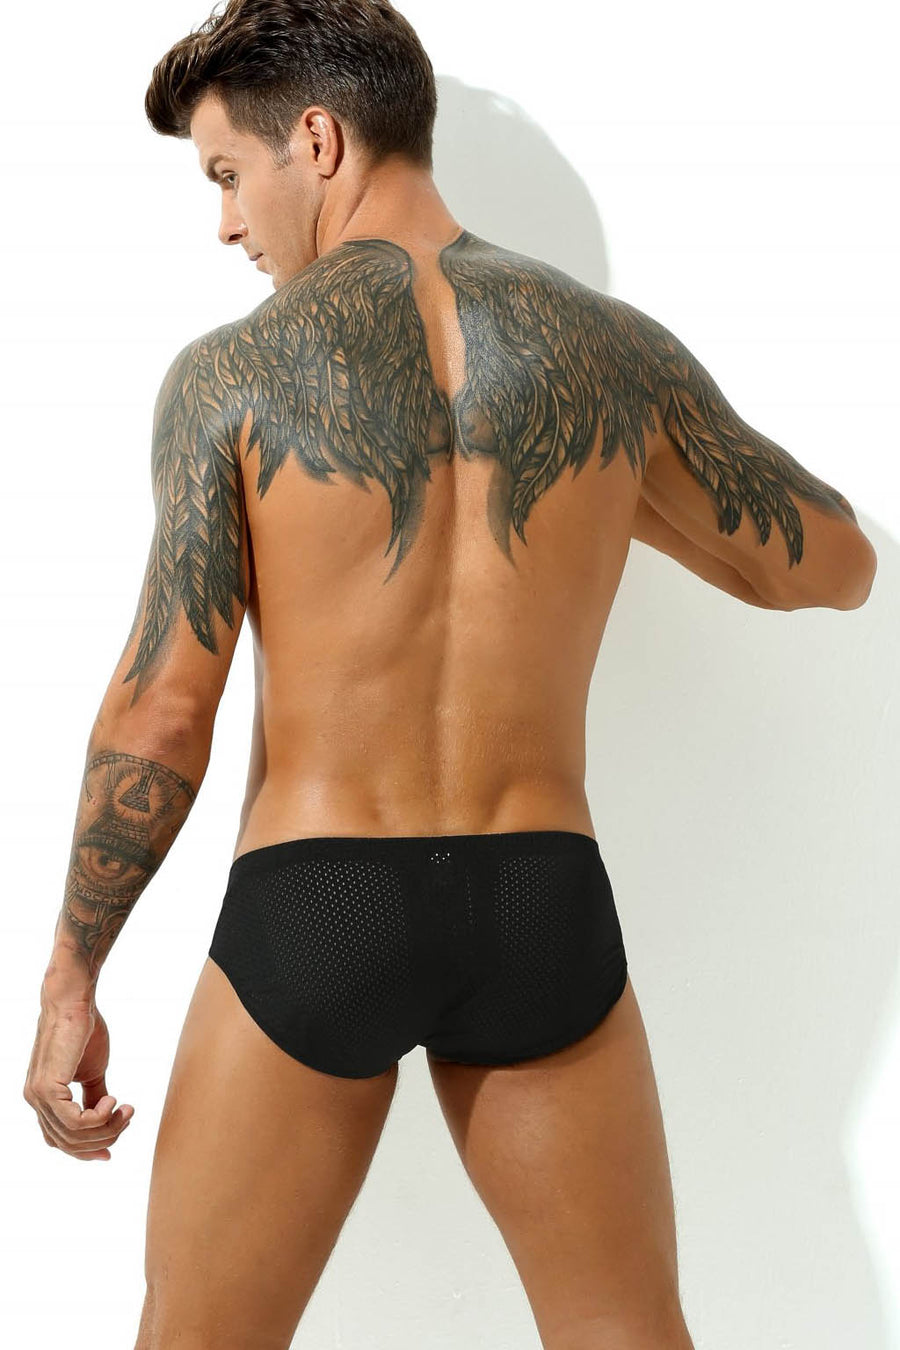 BfM Mens Punch Hole Brief Swimsuit